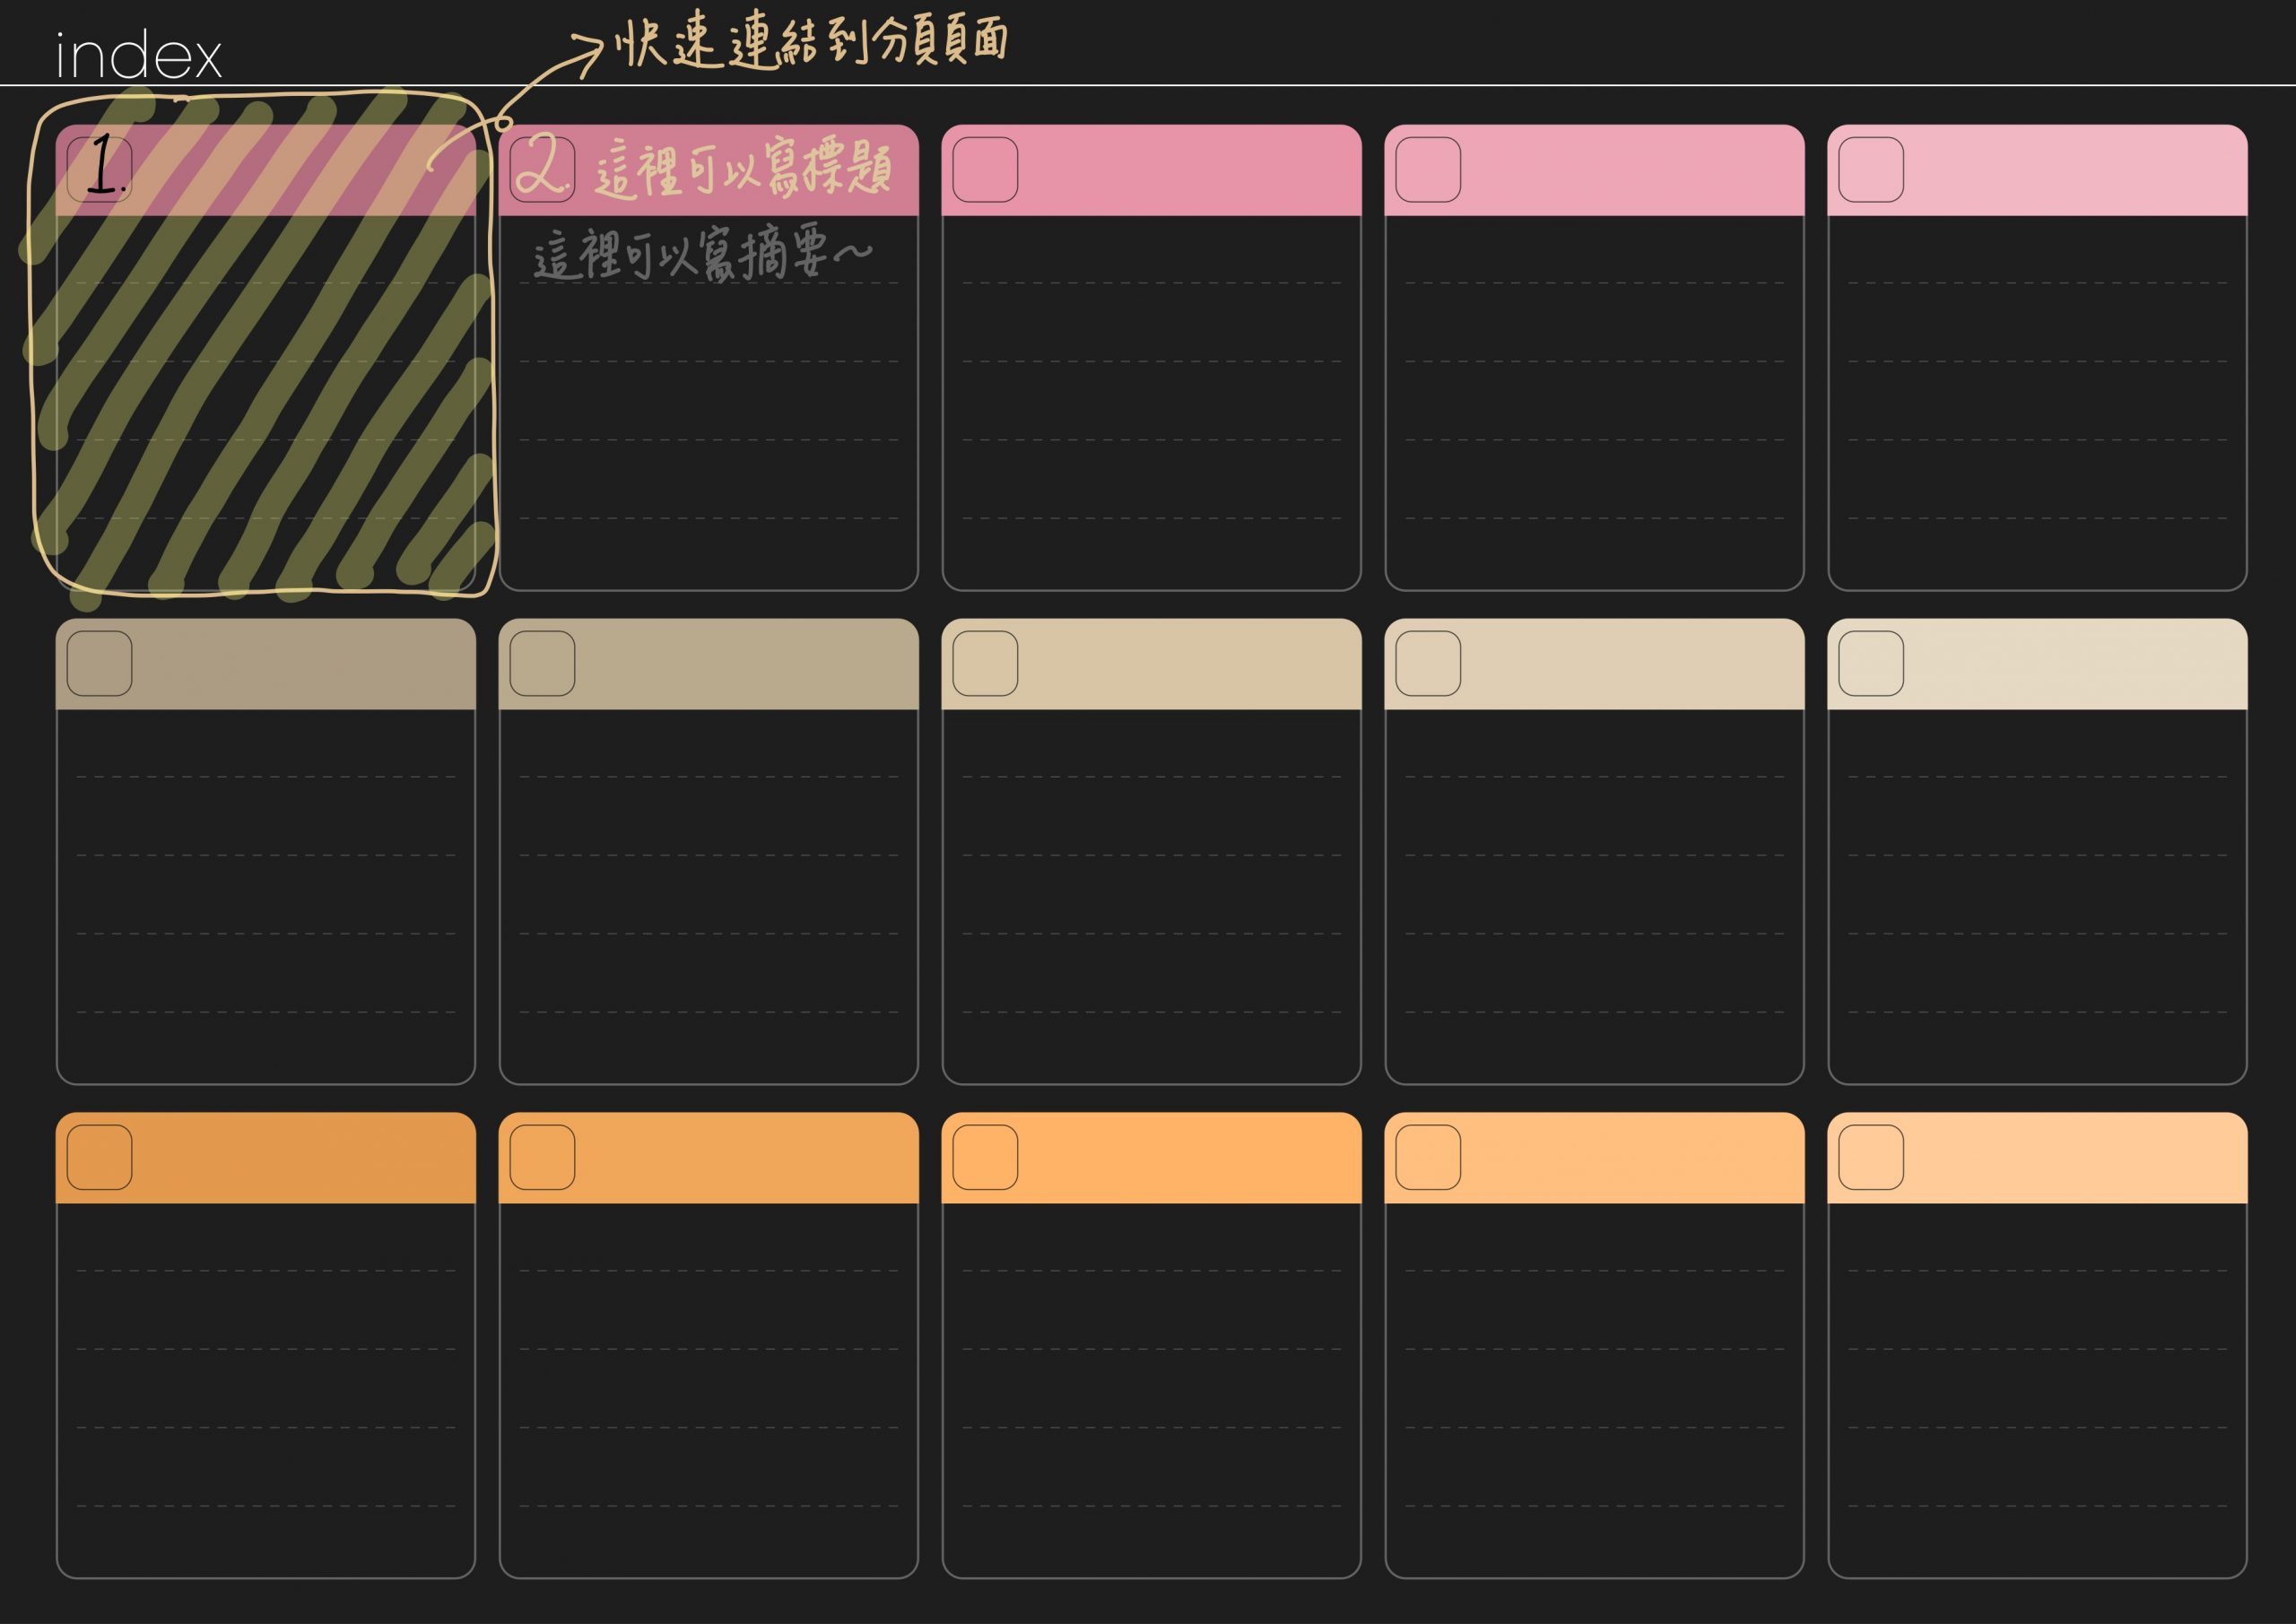 Notebook-Landscape-Solid Color Cover-15 Tabs-Strawberry Cake And Weekends-Dark Mode 索引手寫說明 | me.Learning